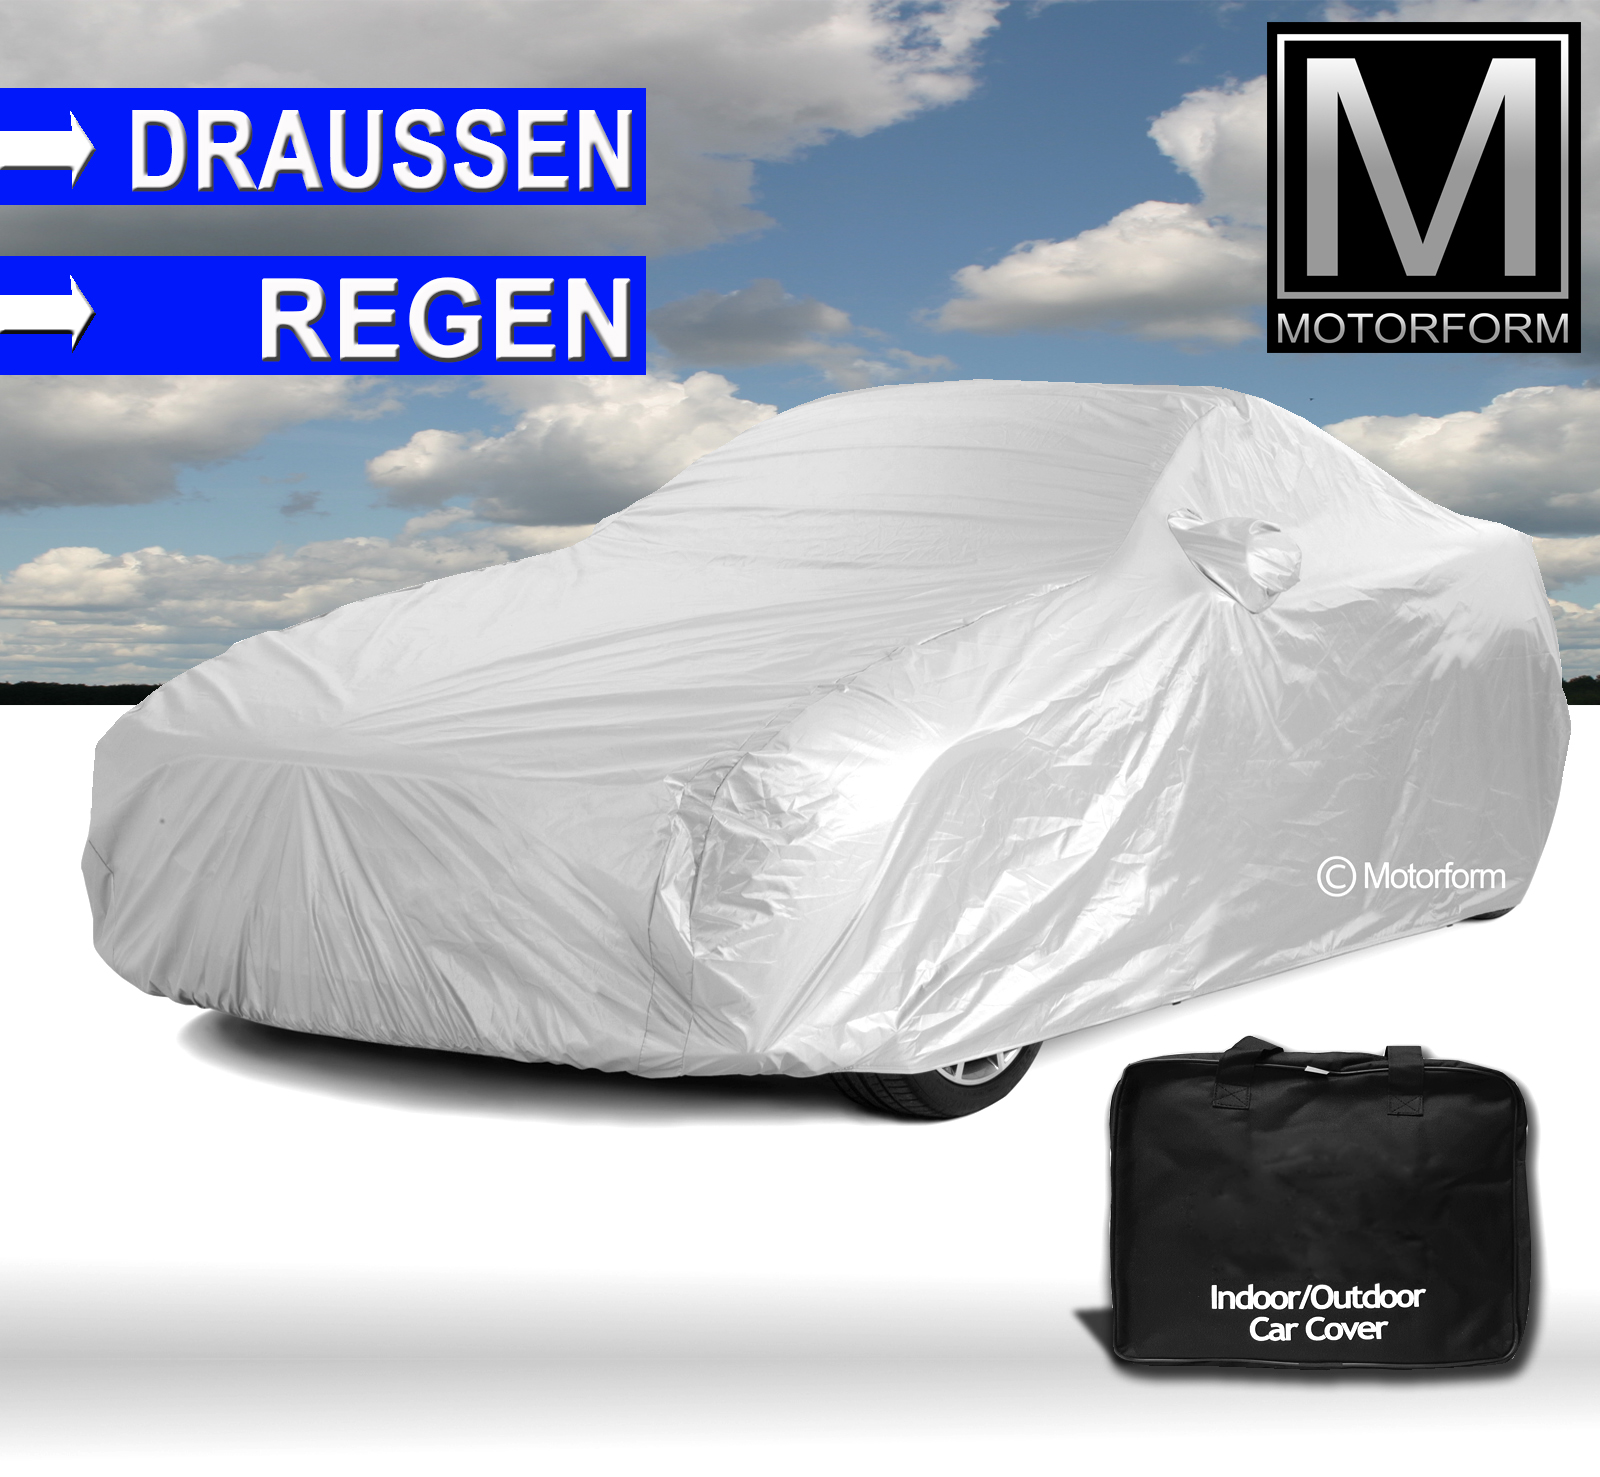 Voyager Outdoor Car Cover for BMW 6 Series 6 Conv. F12 (2011-)